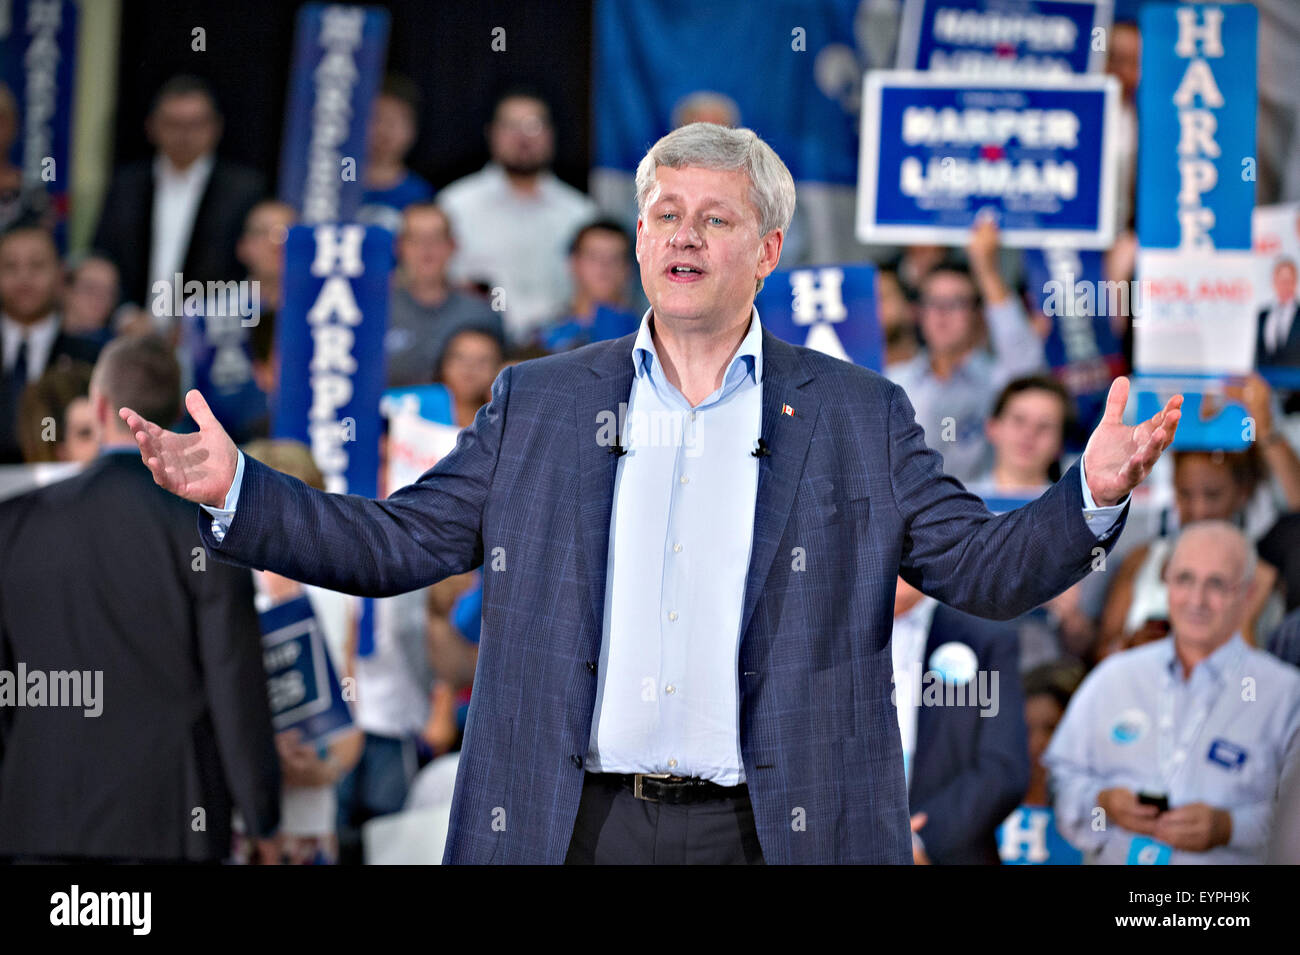 Montreal, Canada. 2nd Aug, 2015. Canadian Prime Minister Stephen Harper speaks to supporters during a rally in Montreal Aug. 2, 2015. Stephen Harper on Sunday called a parliamentary election for Oct. 19 and kicked off his Conservative party's election campaign. Credit: Andrew Soong/Xinhua/Alamy Live News Stock Photo